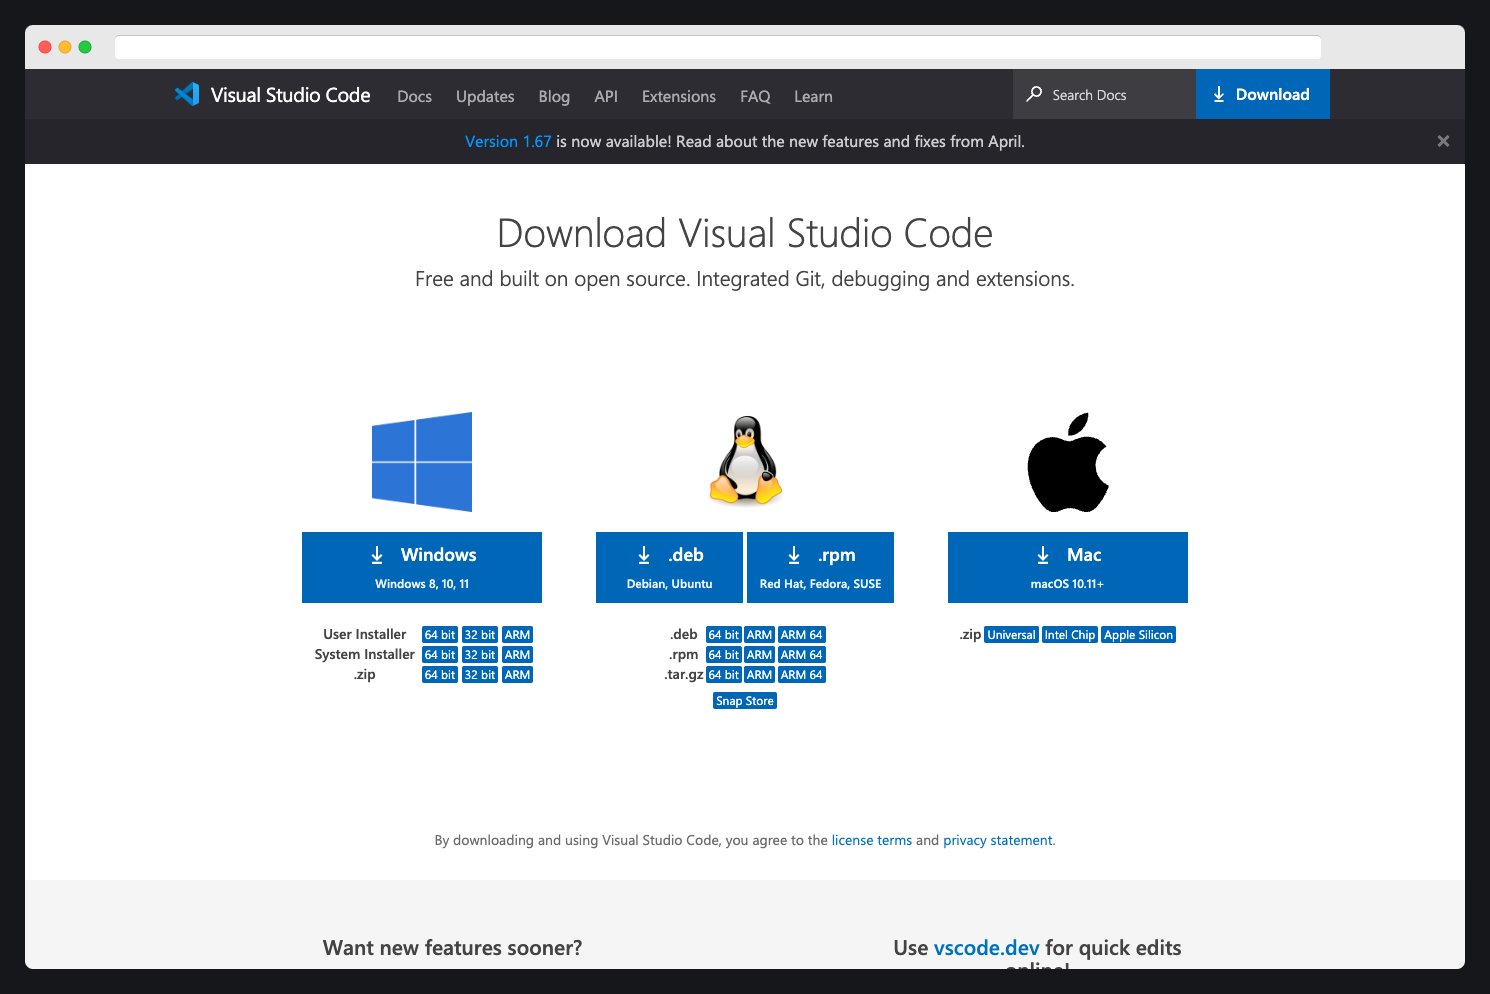 The VS Code download page